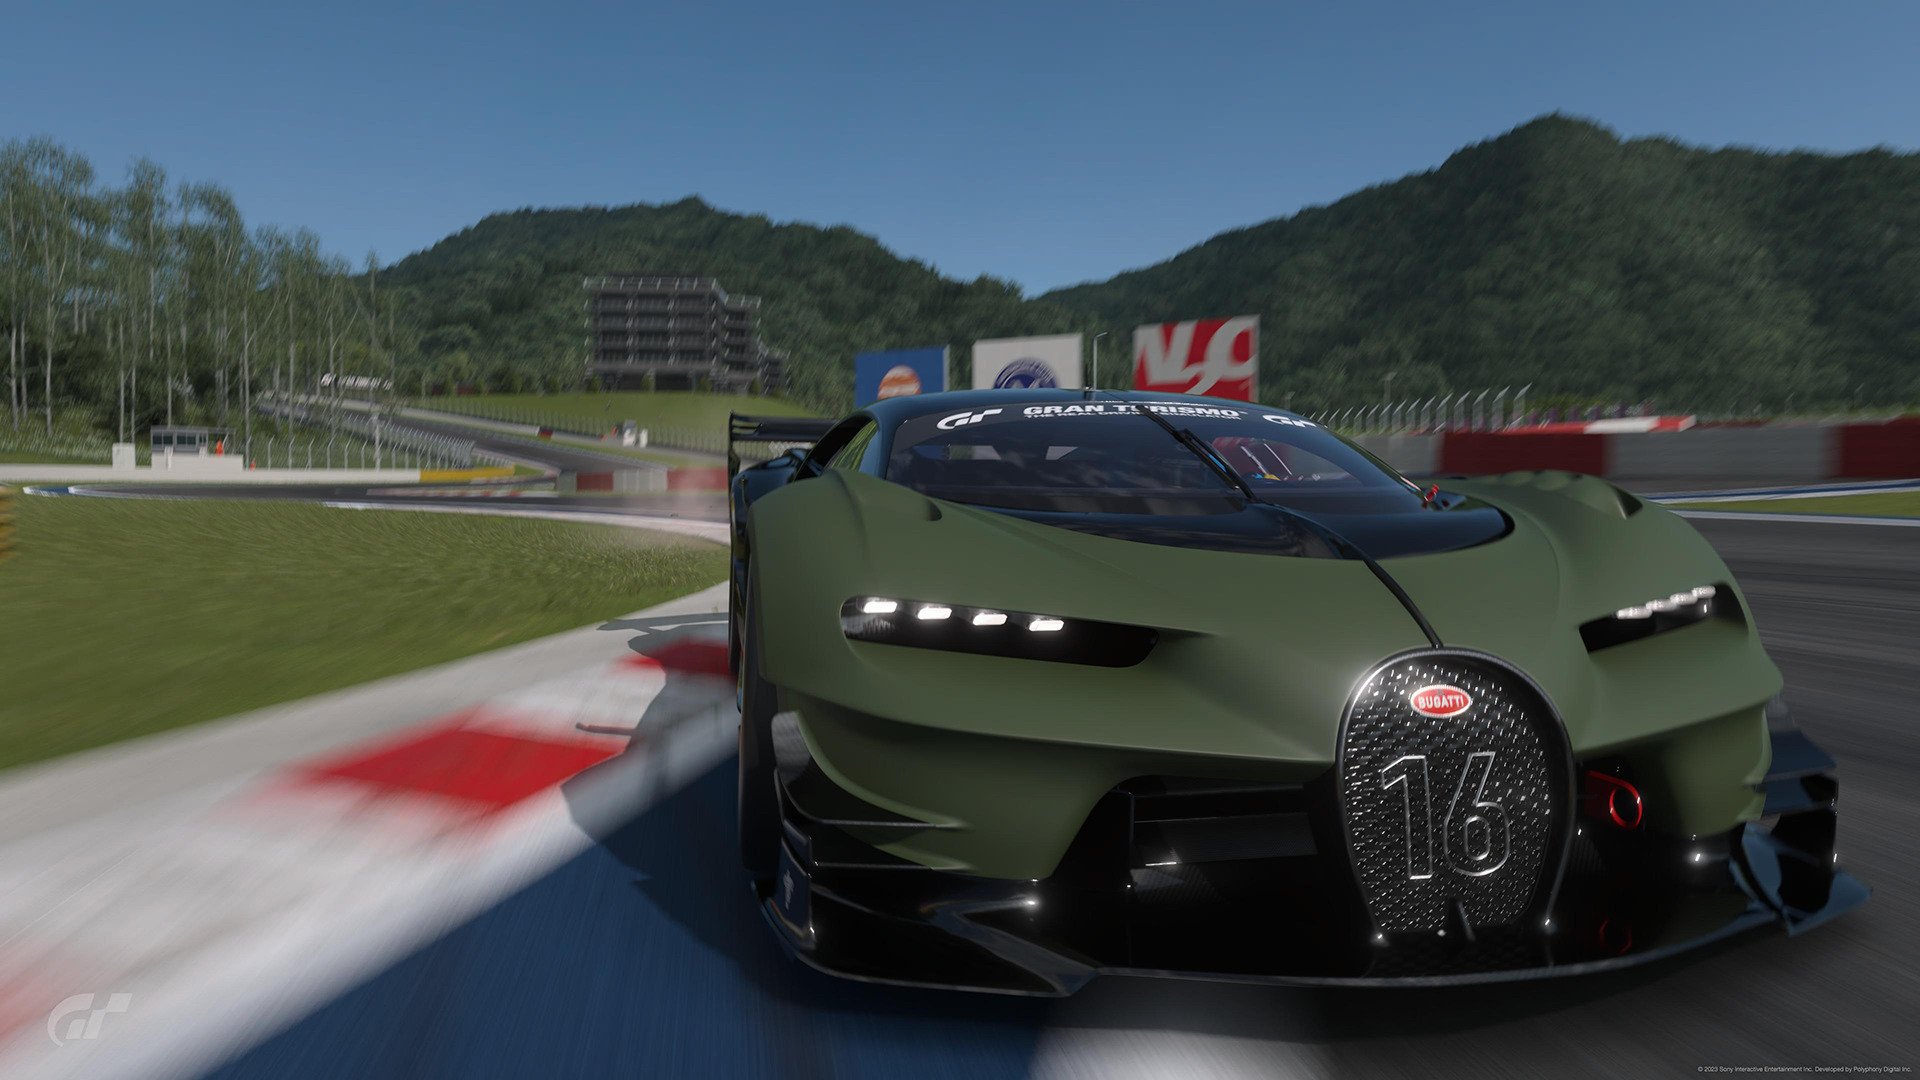 Gran Turismo 7 Online Time Trial: Slide Show – GTPlanet